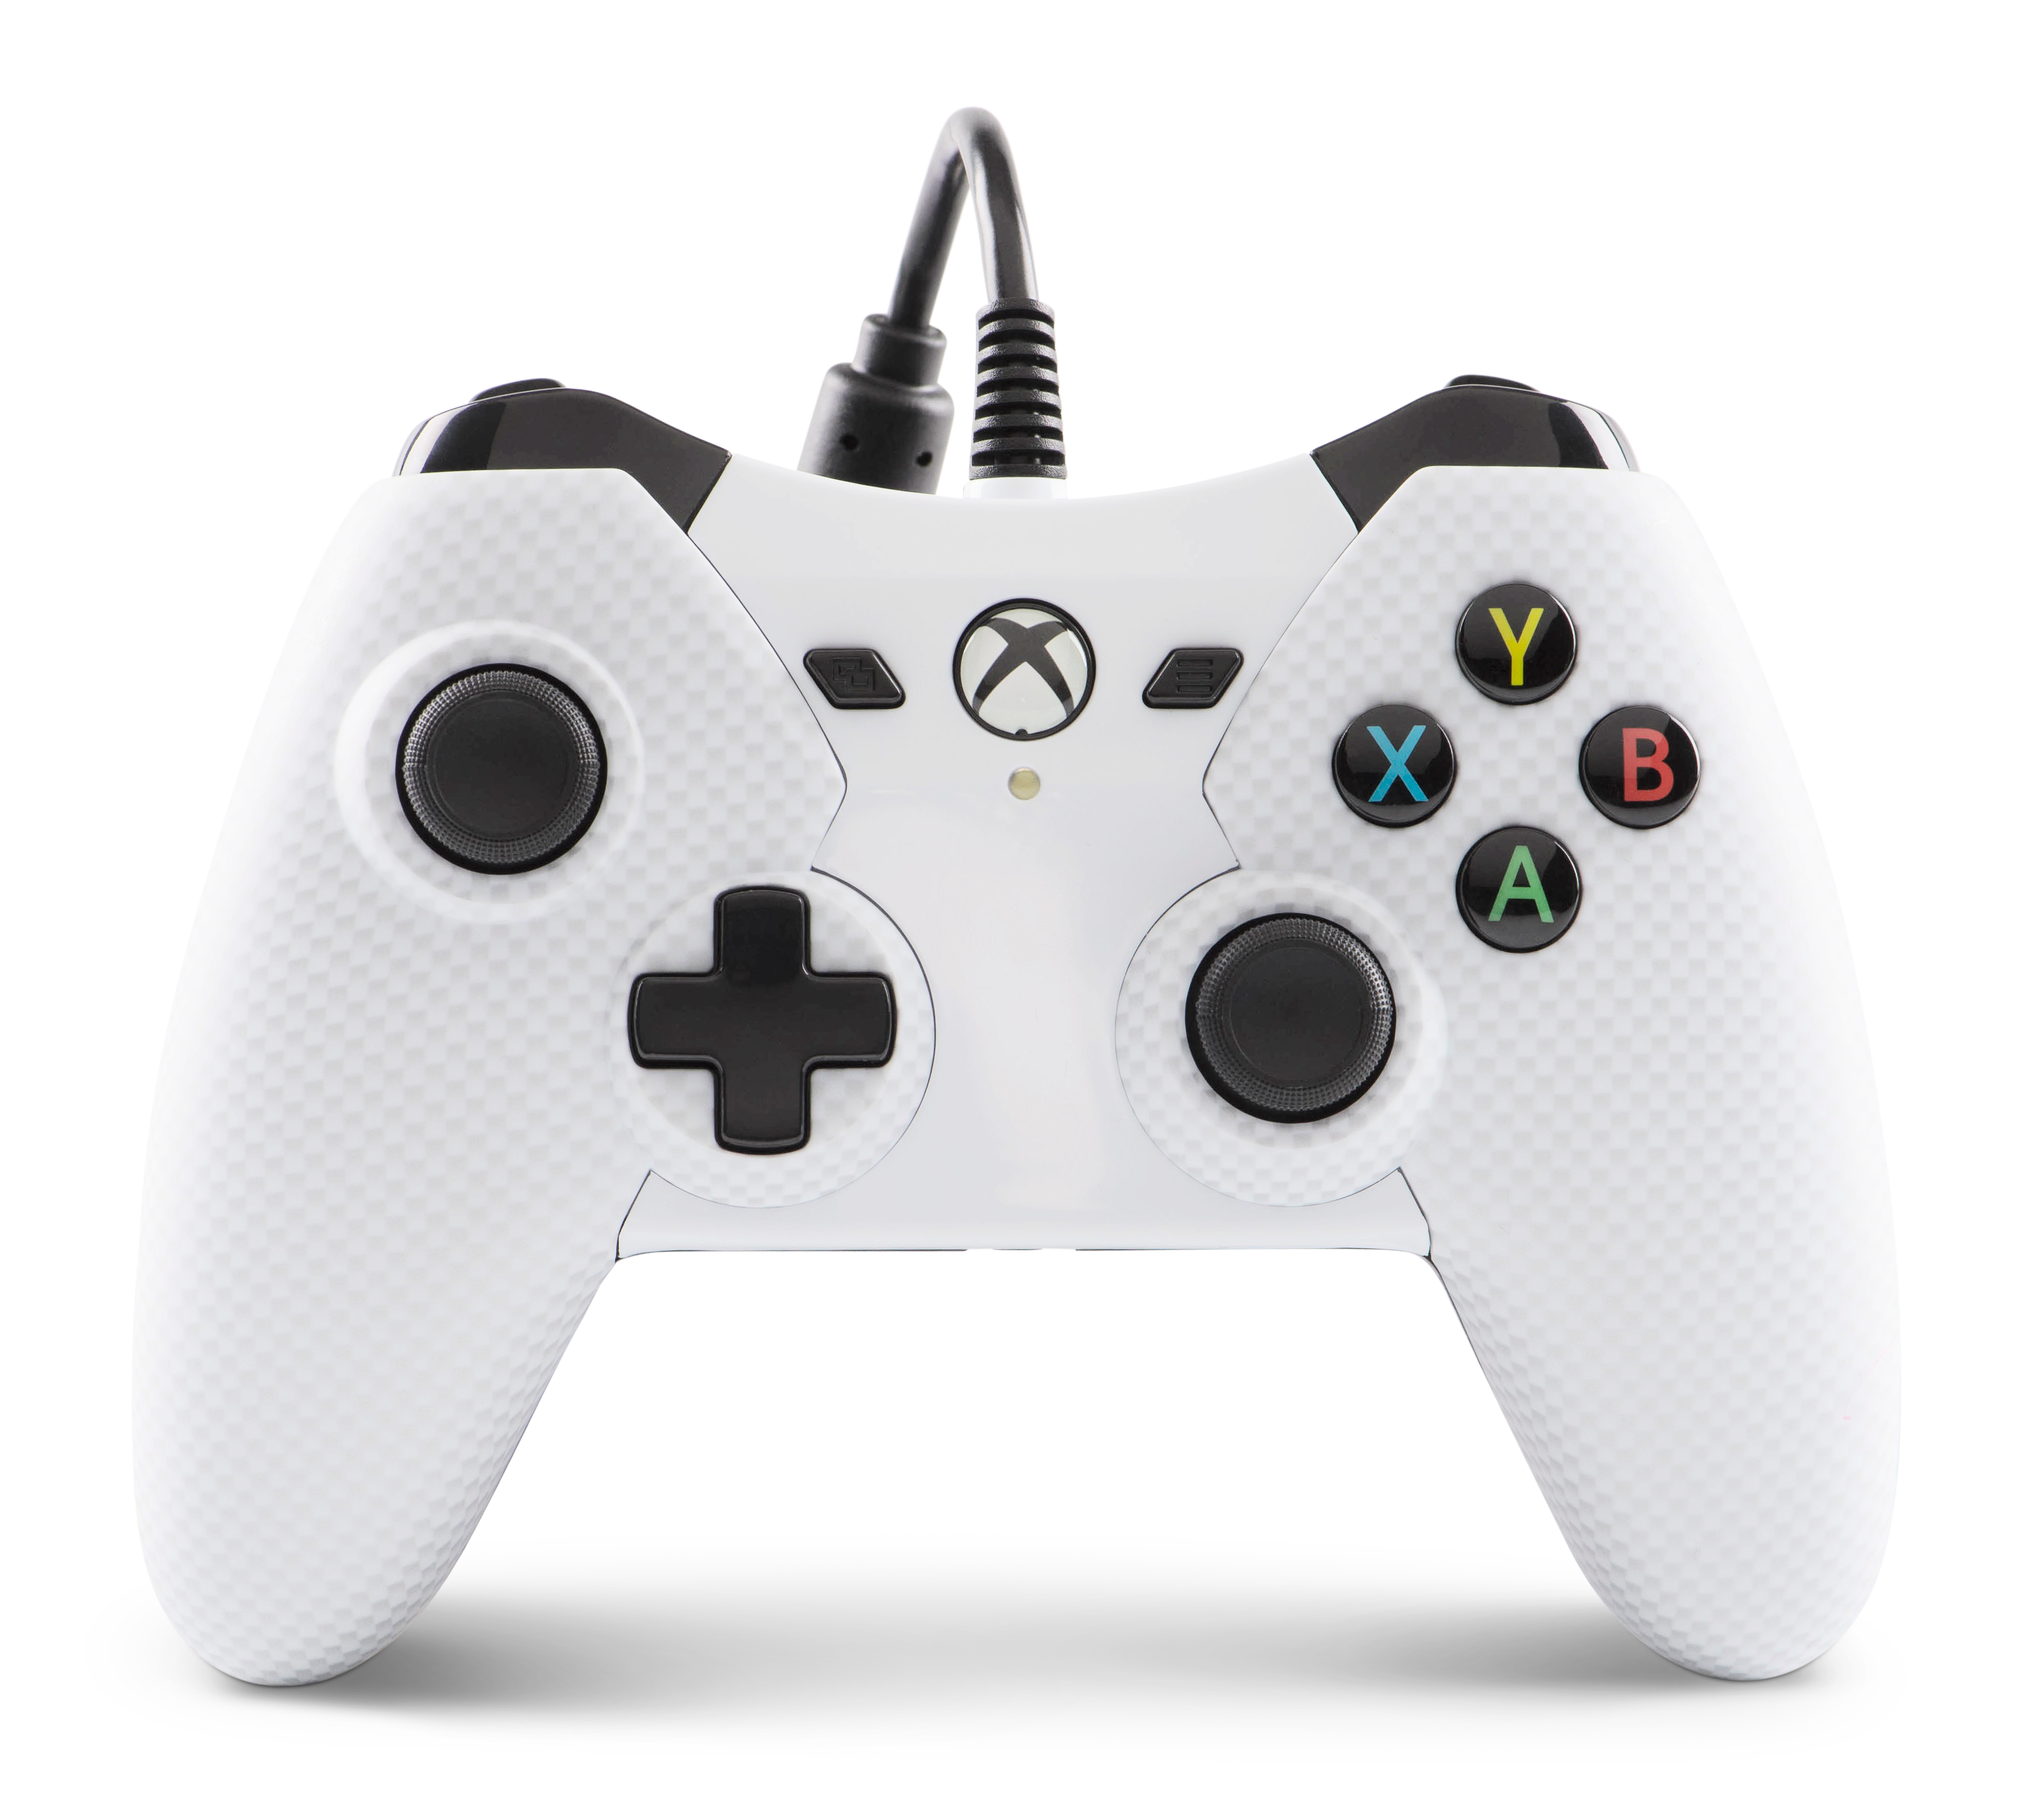 wired official xbox one controller